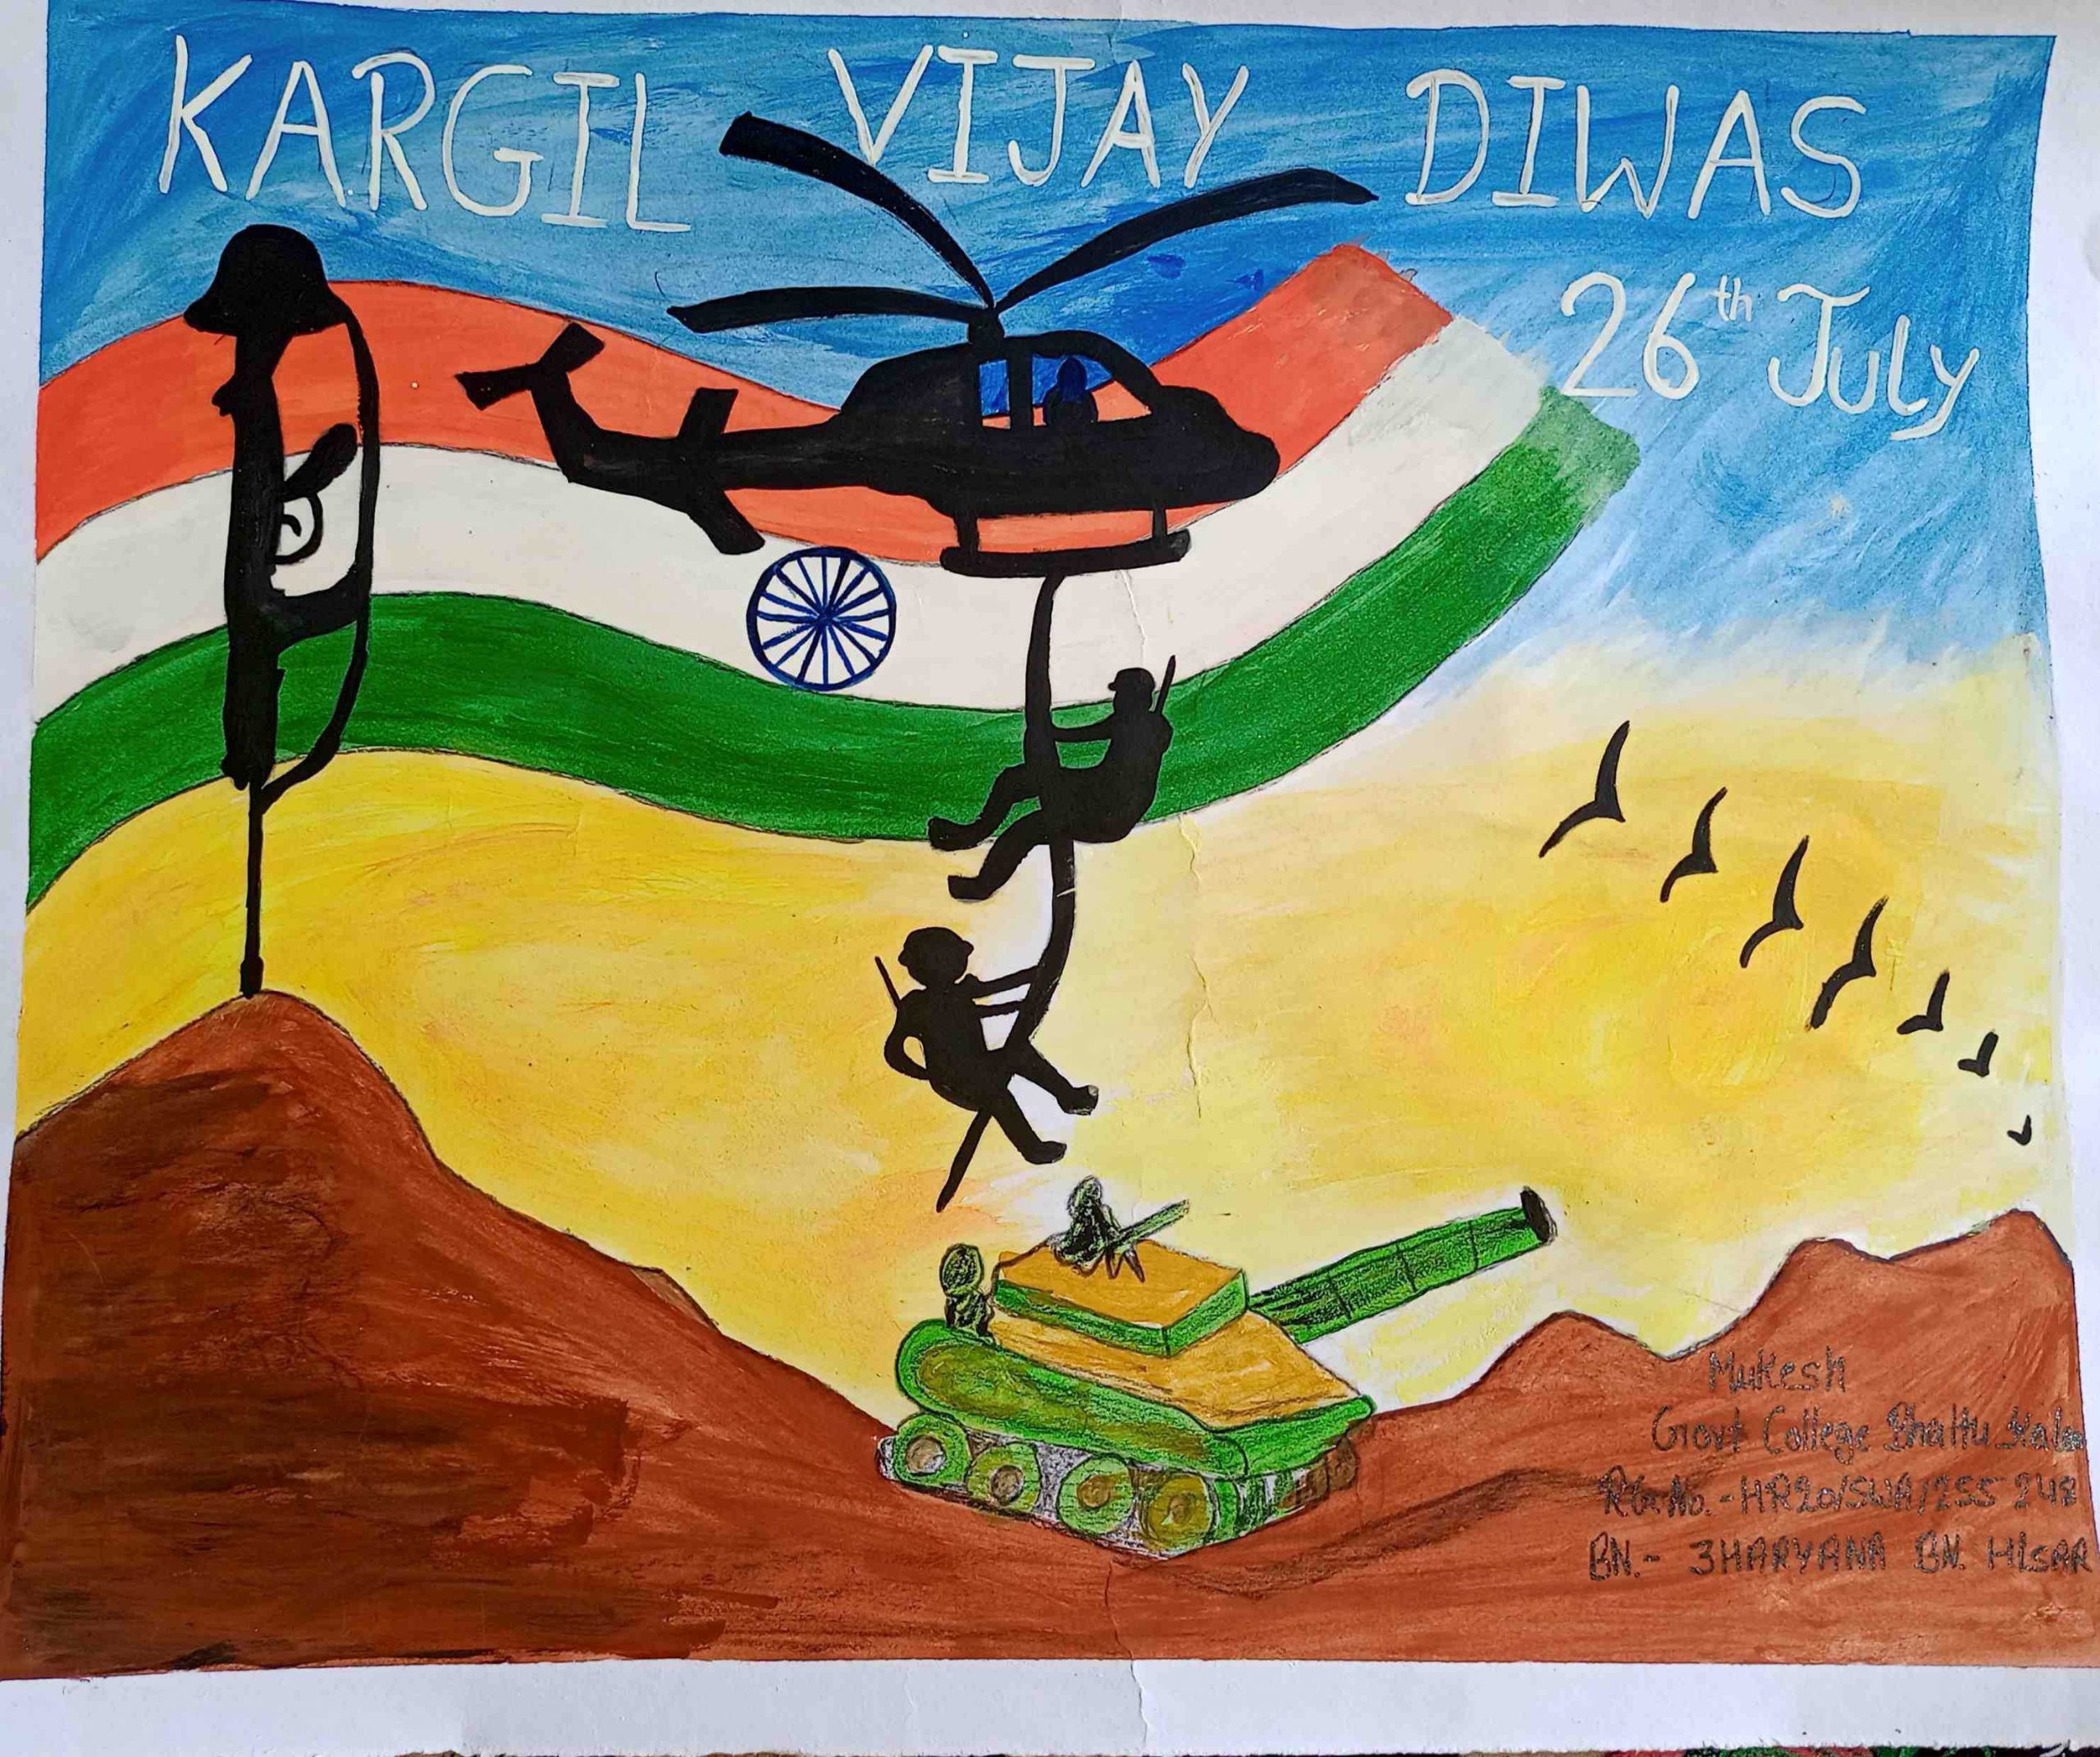 Vector illustration for kargil vijay diwas celebrated on 26th july to give  tribute to all the martyrs who sacrificed there | CanStock